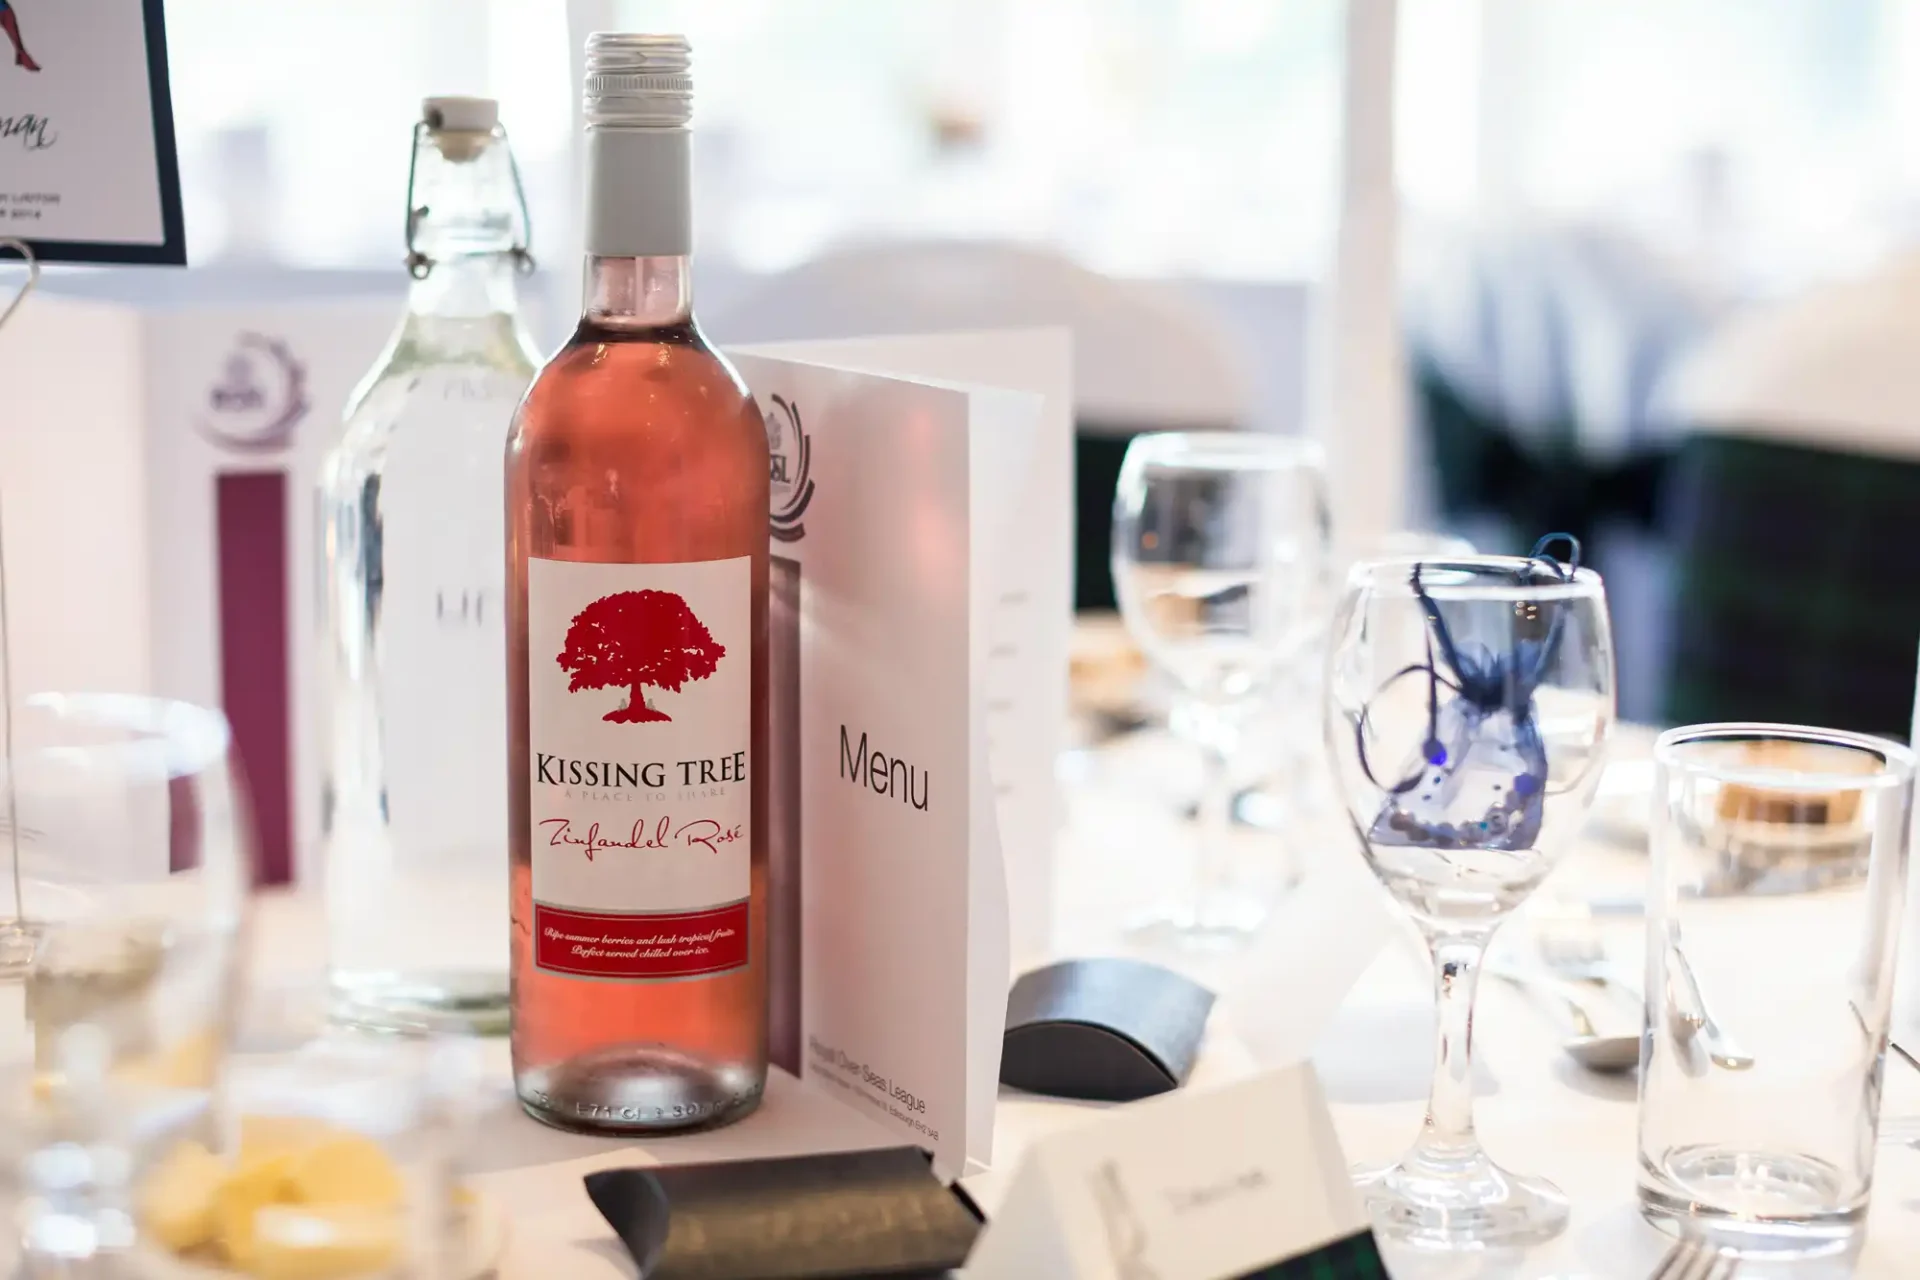 A bottle of kissing tree rosé wine positioned on a decorated dining table with menus and glasses.